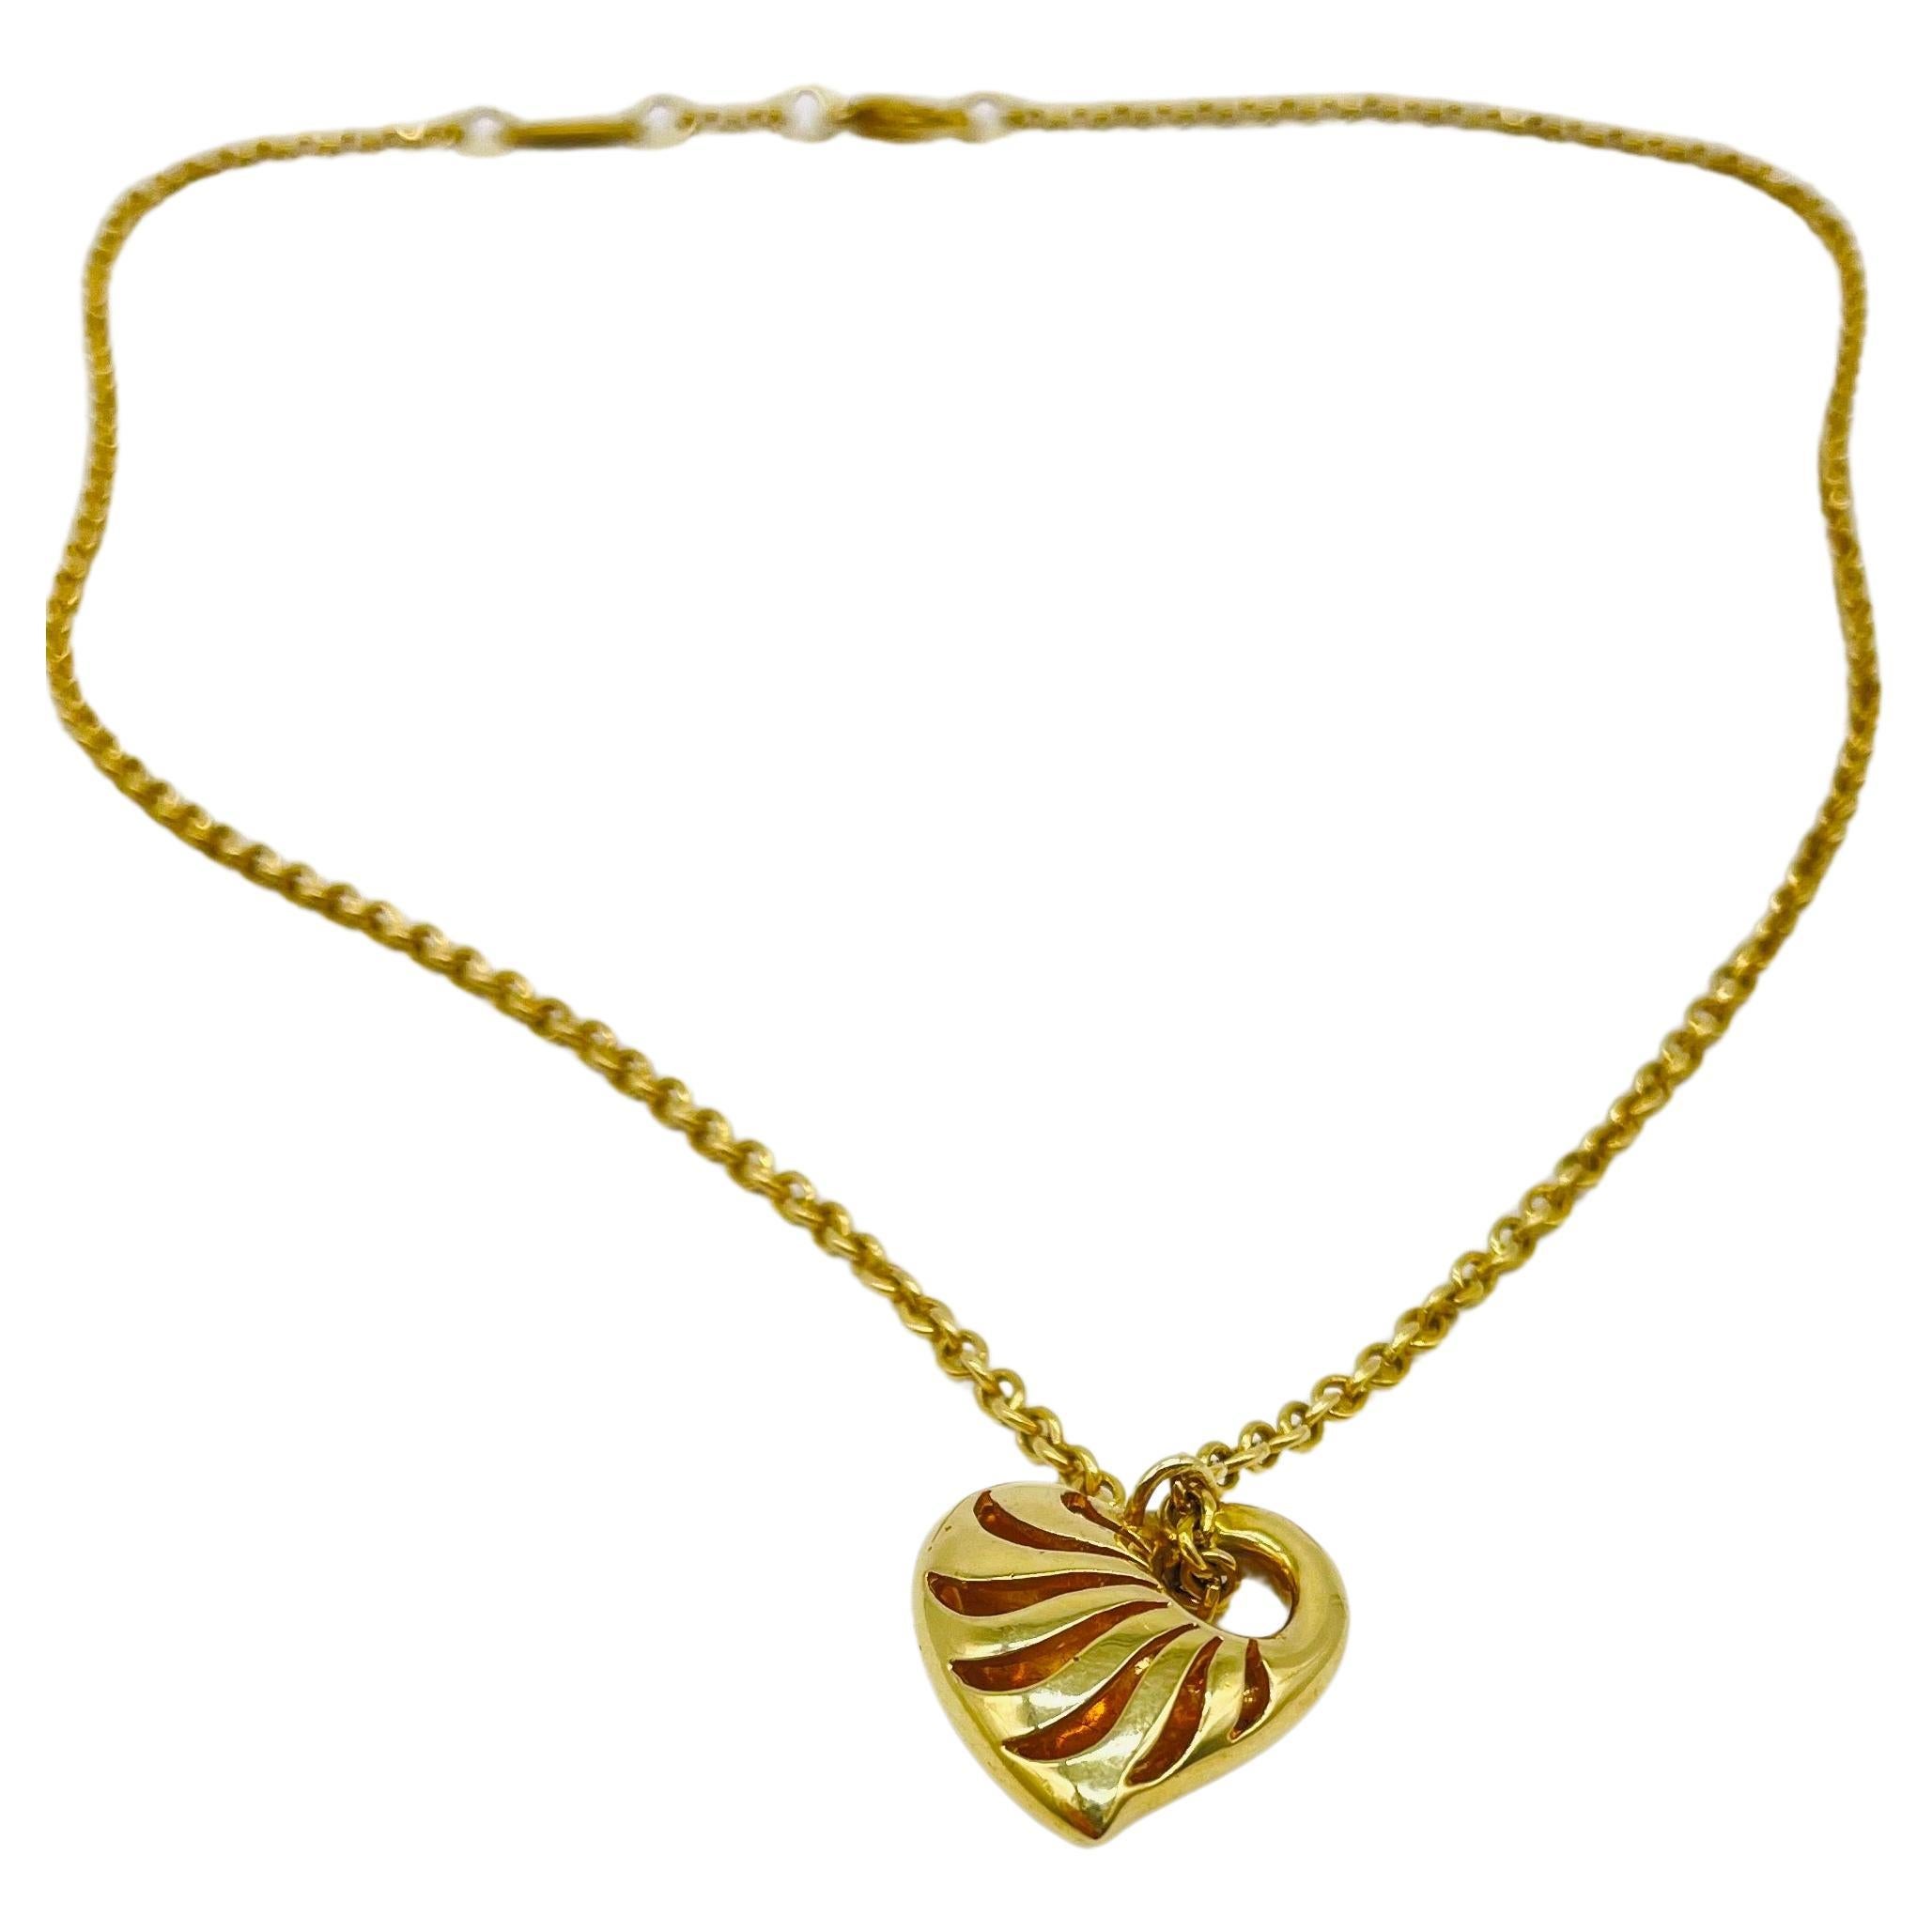 Aesthetic Movement beautiful heart-shaped necklace in 14k yellow gold For Sale